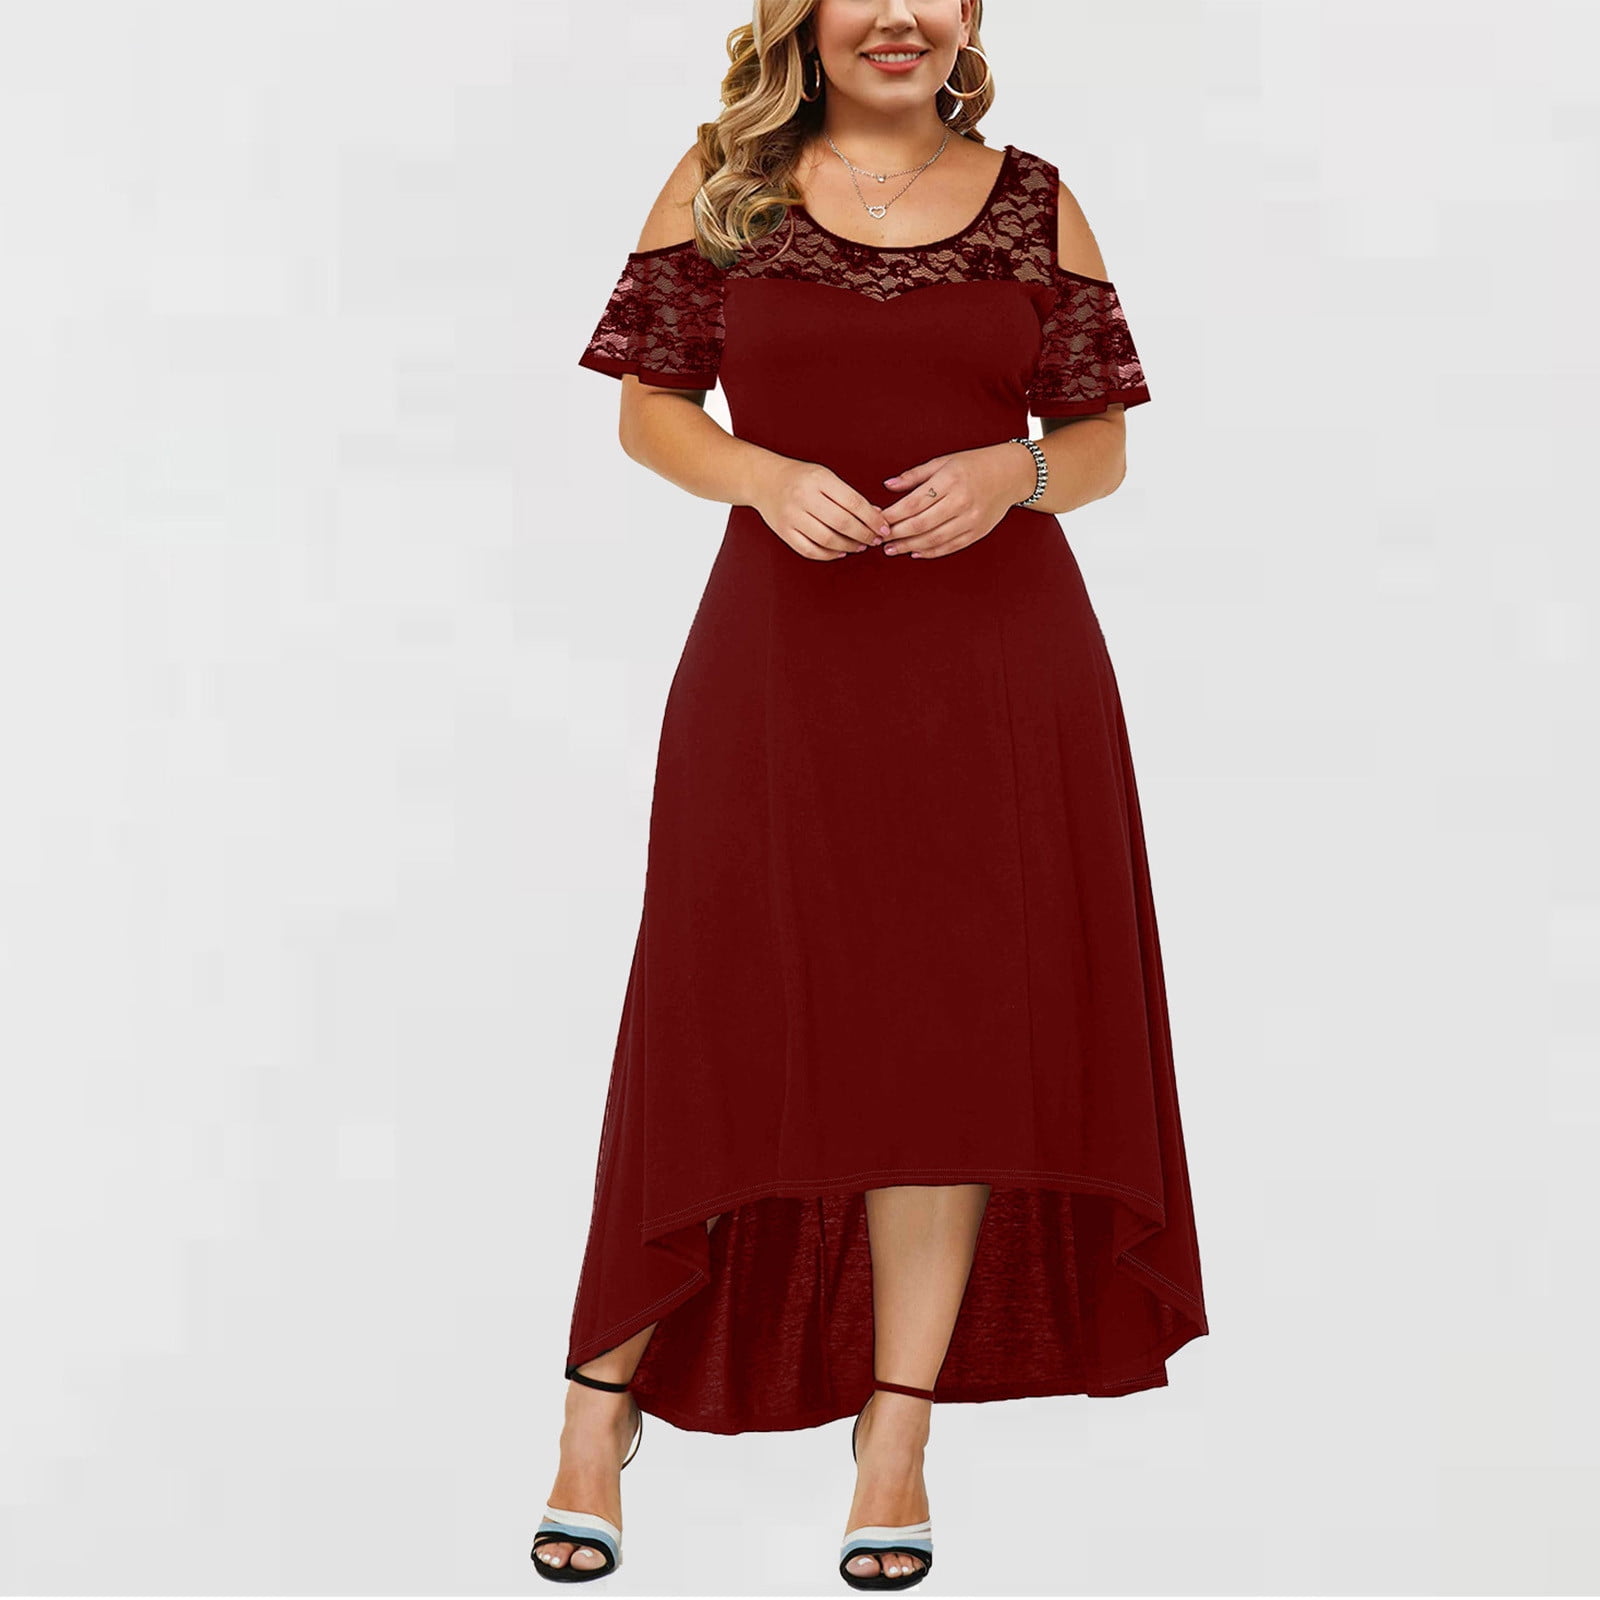 Women's Clothes 2022 Summer New Fashion Women's Off Shoulder Short Sleeve  Lace V-neck Printed Casual Dress Soft and Comfortable Plus Size Loose Dress  S-5XL